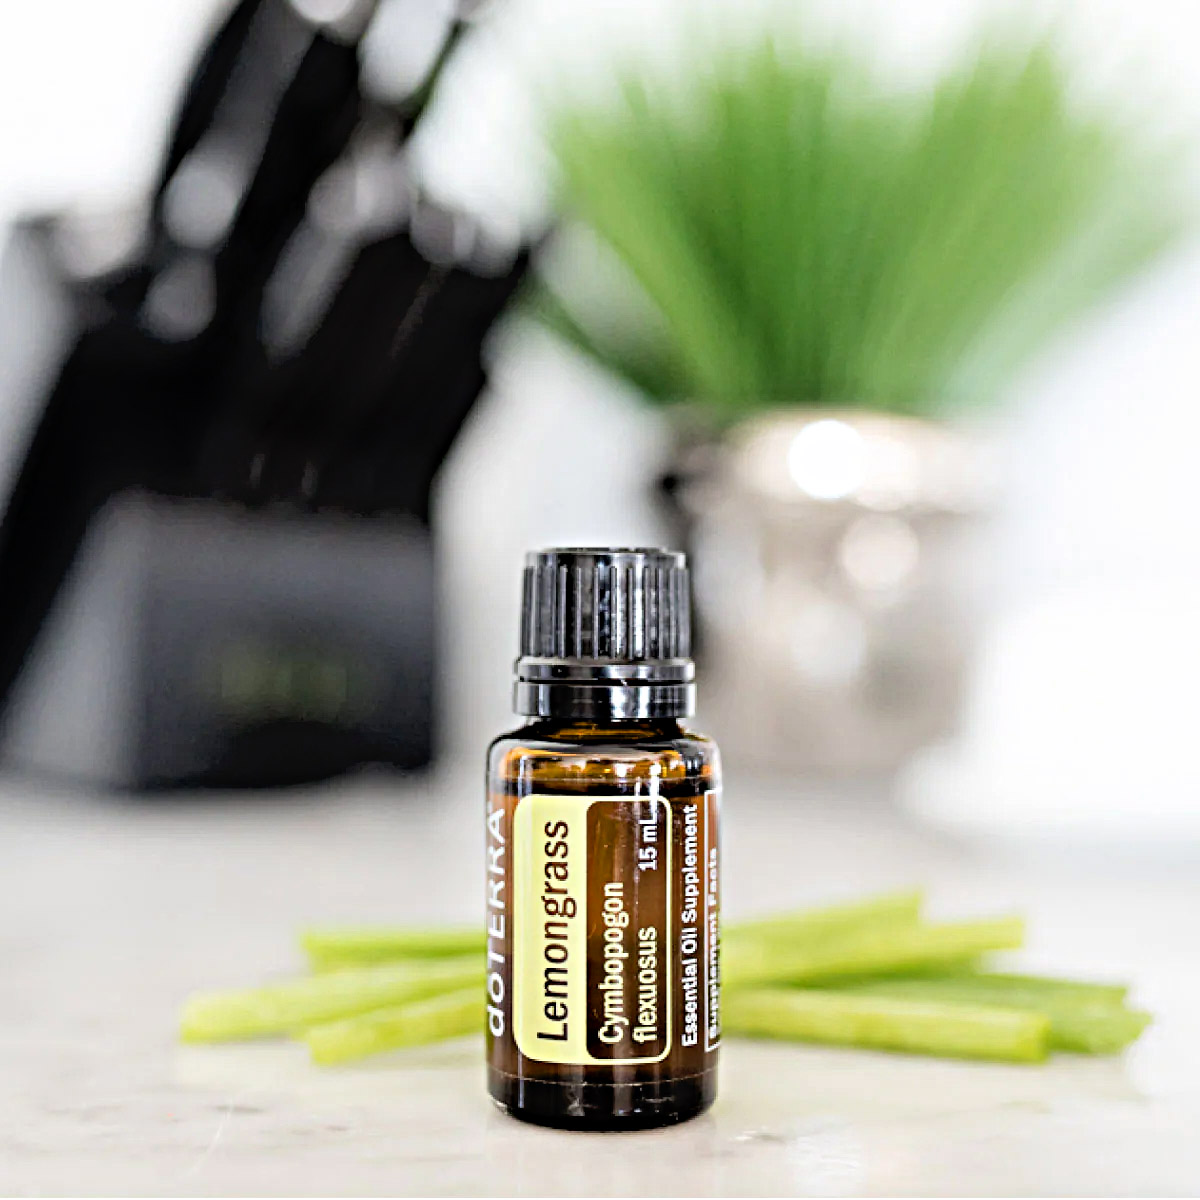 What Is Lemongrass Essential Oil Good For In A Diffuser